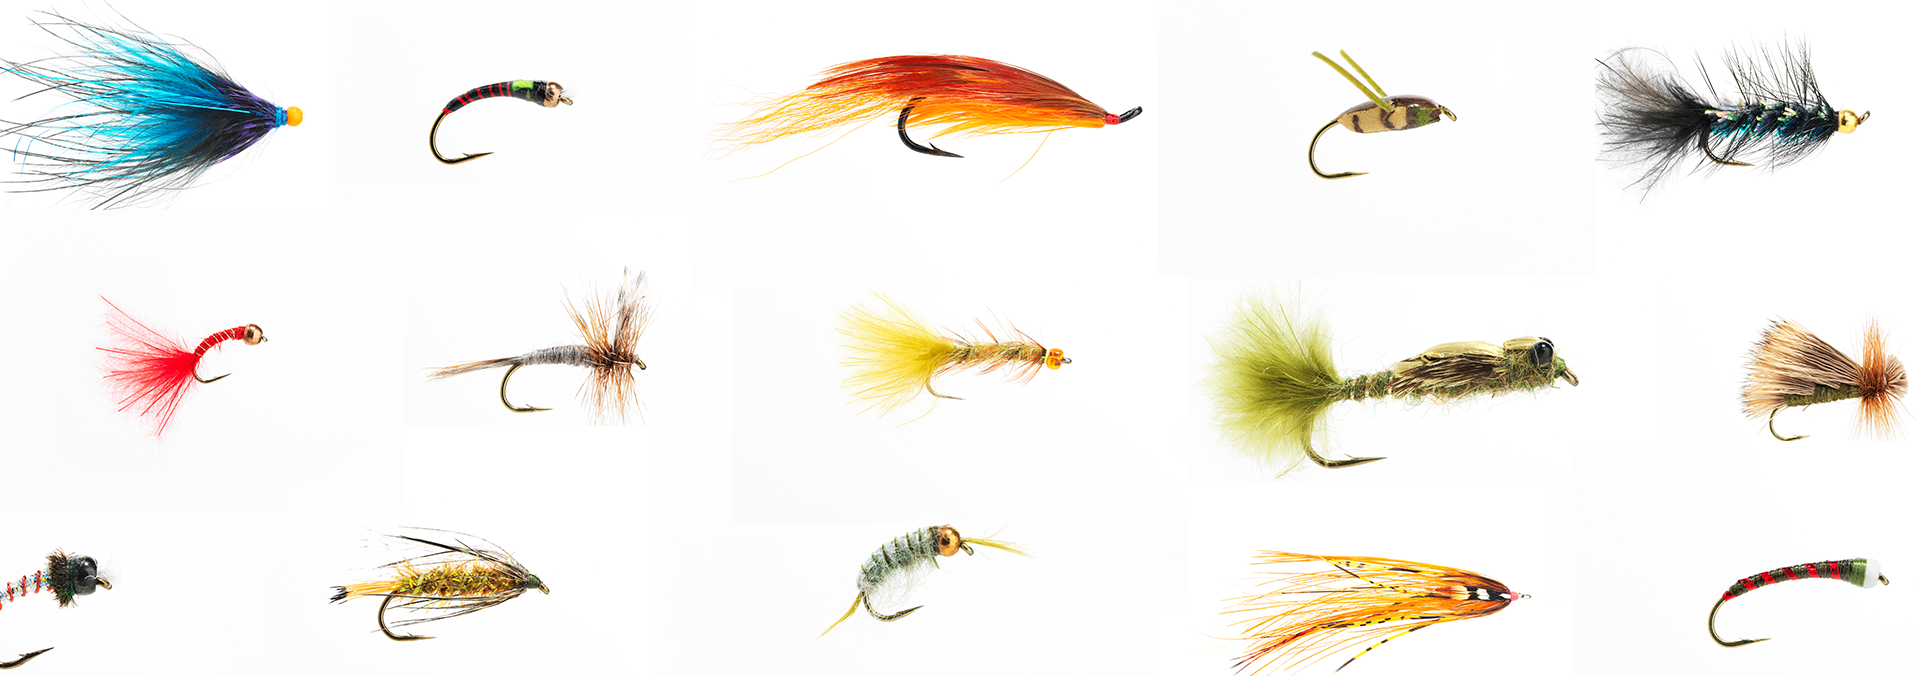 The Blob – Fly Fish Food